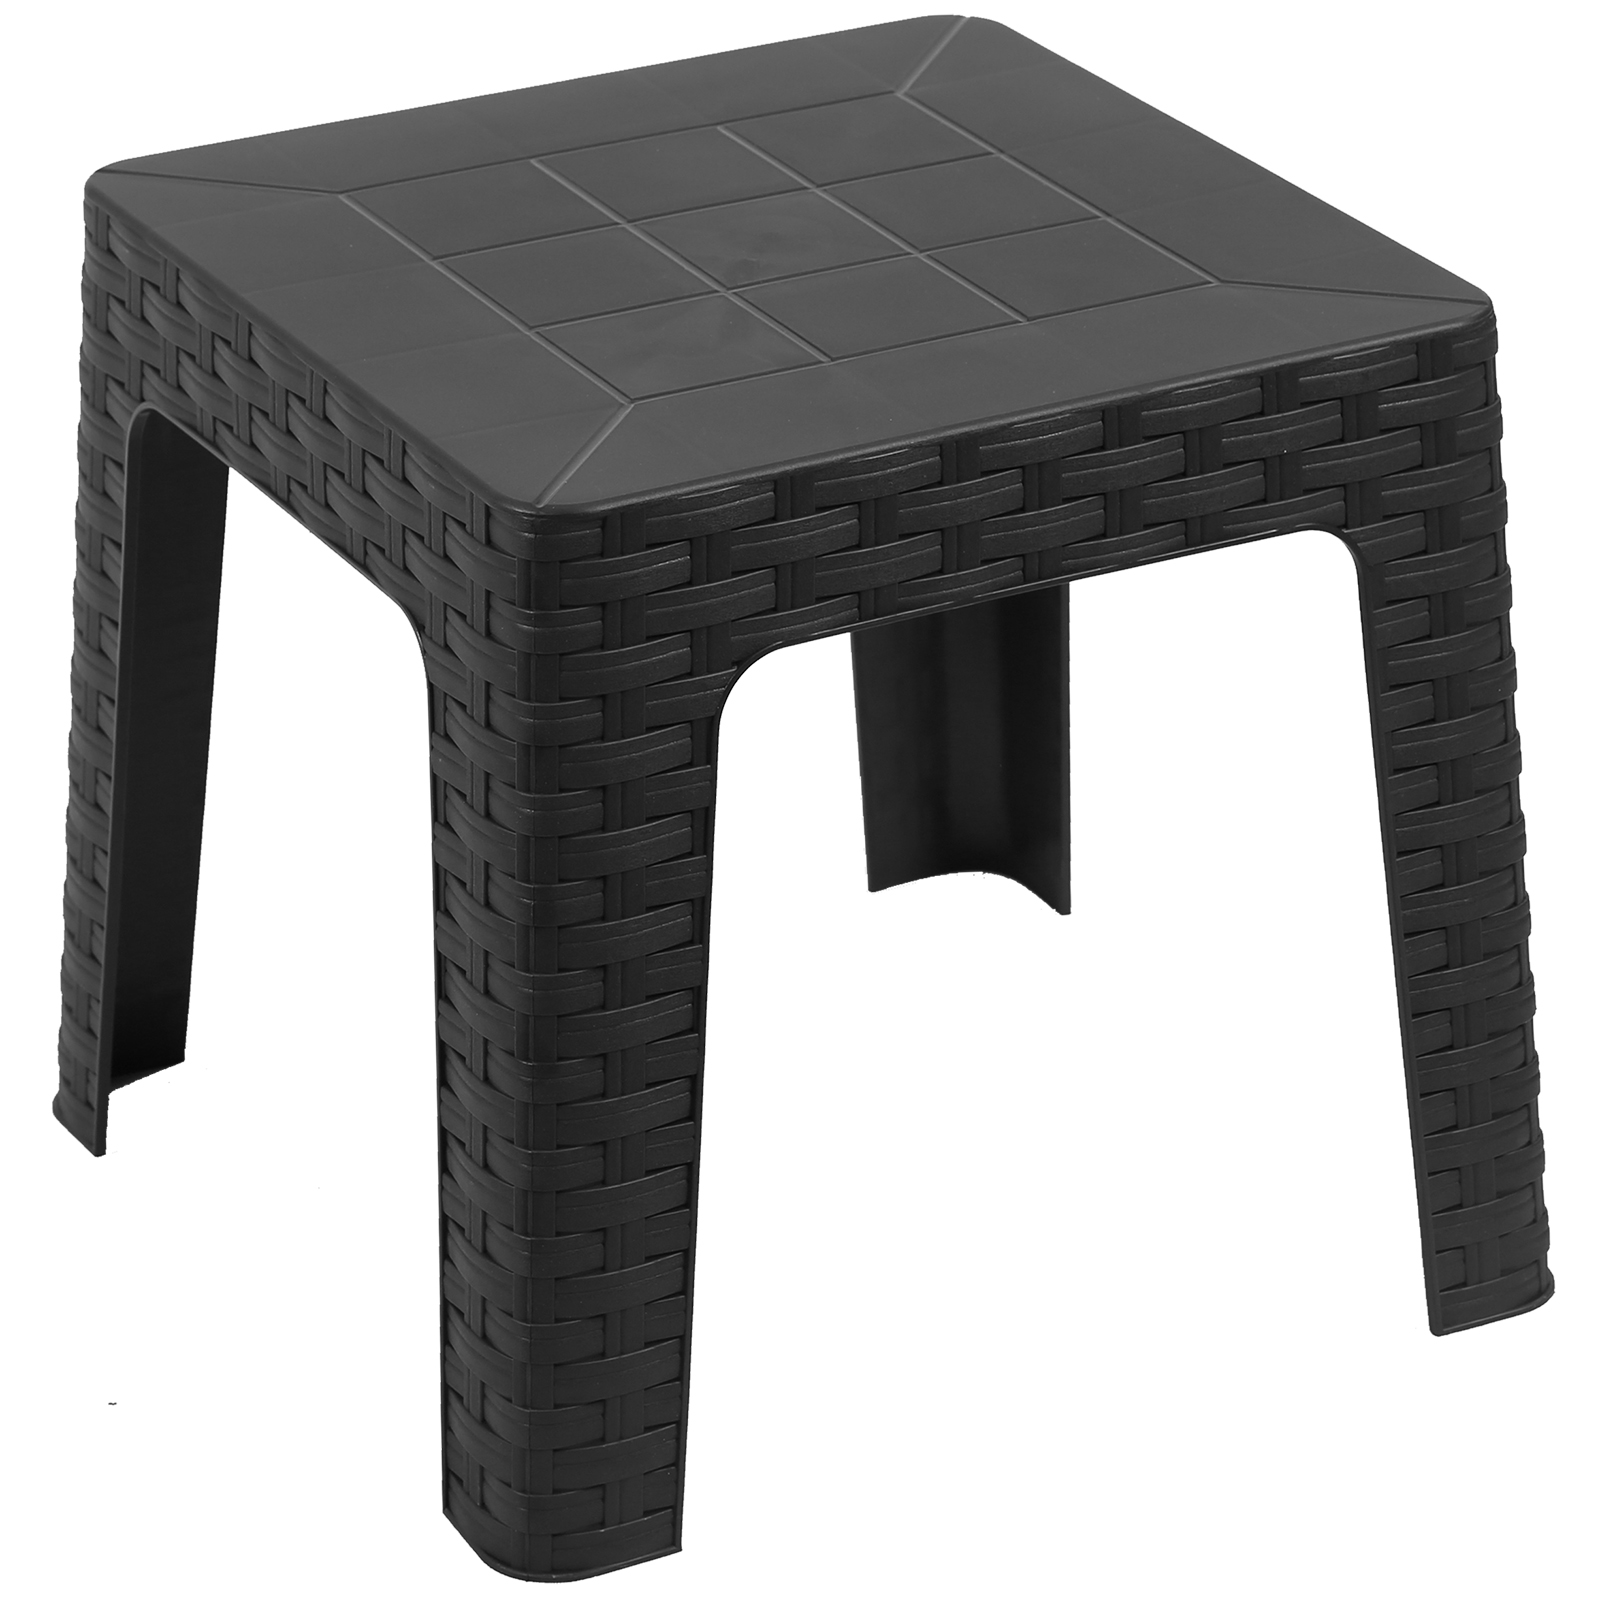 Small outdoor side tables - rightdetective